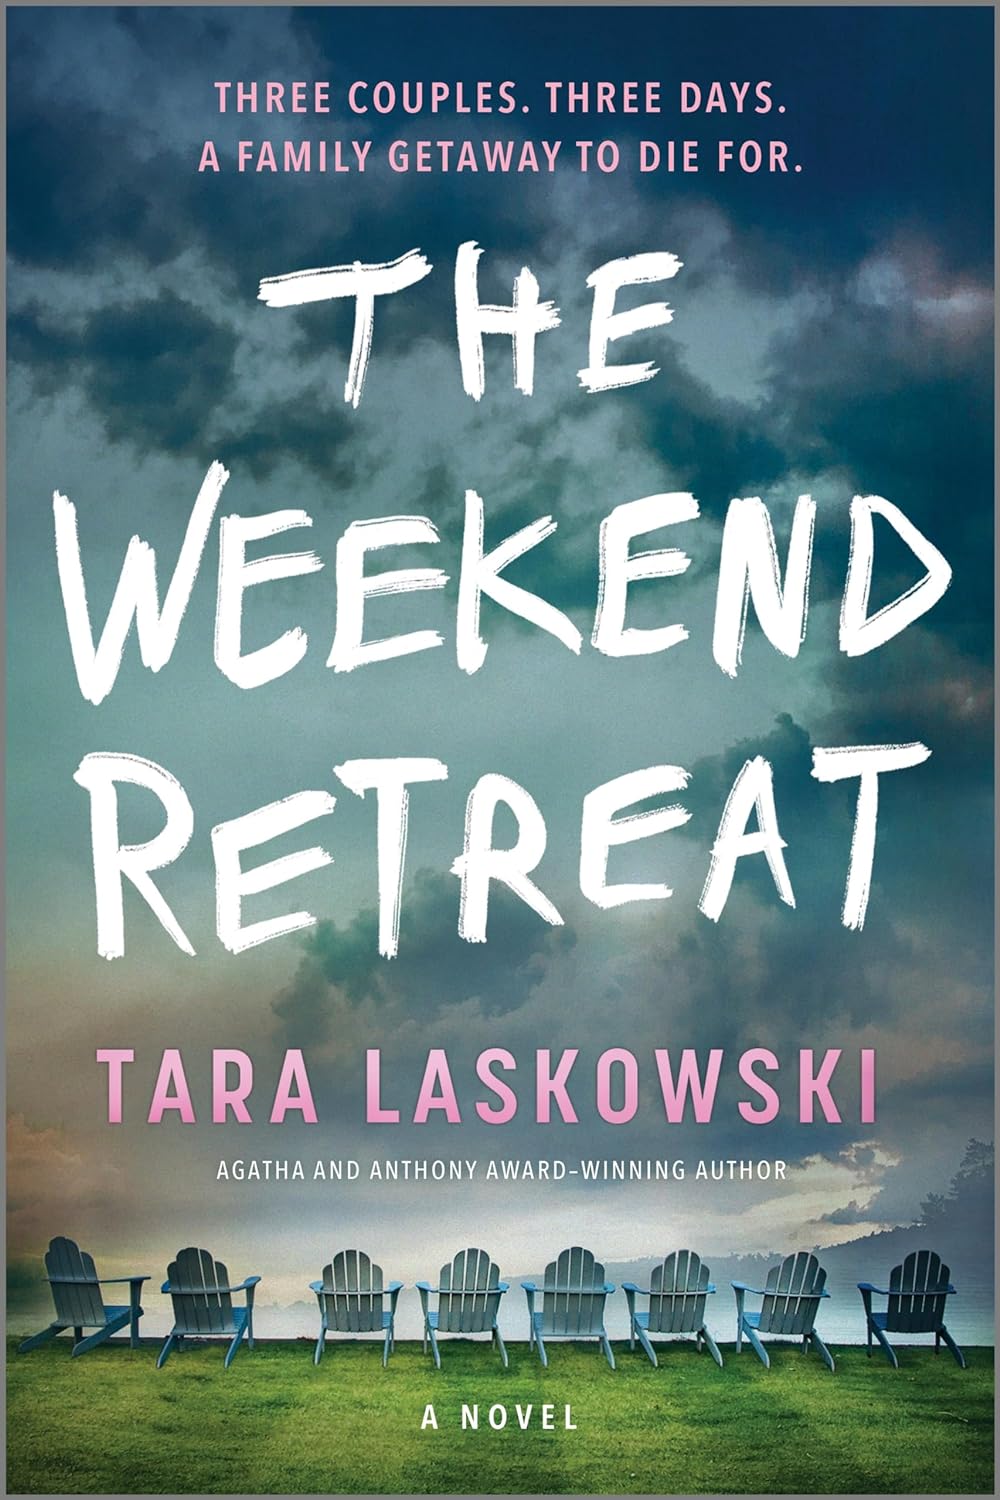 Image for "The Weekend Retreat"